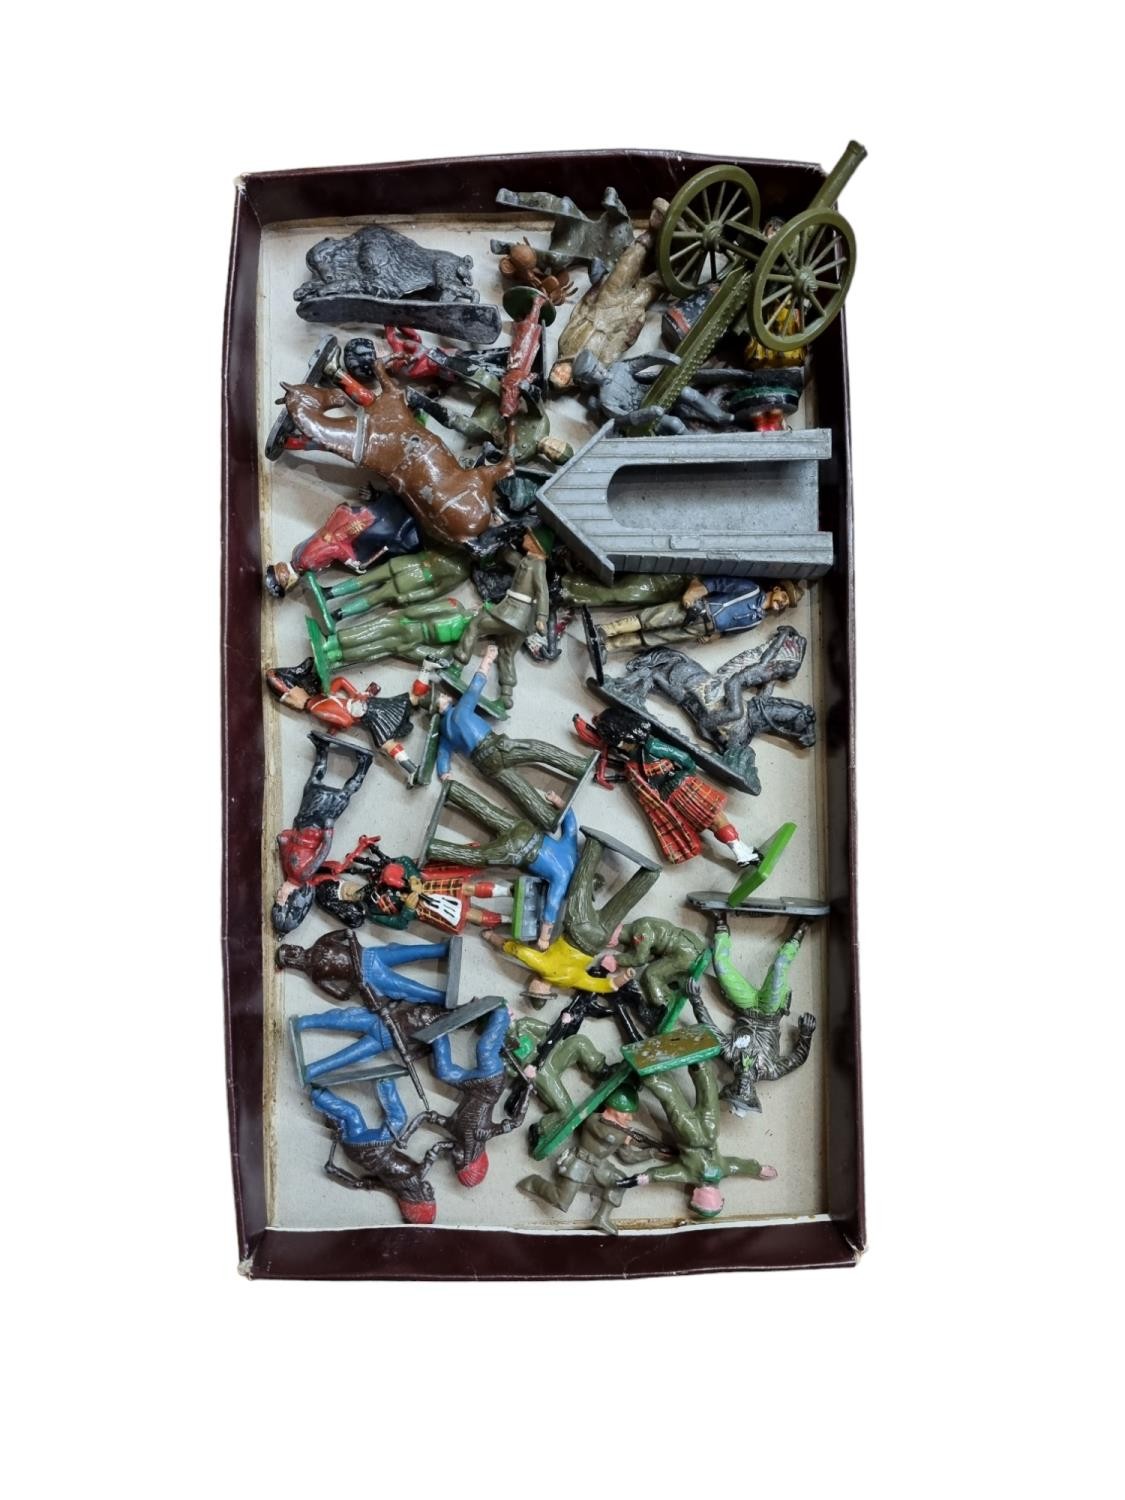 Collection of Vintage Diecast Metal & Lead Soldiers & Artillery including Britain's examples